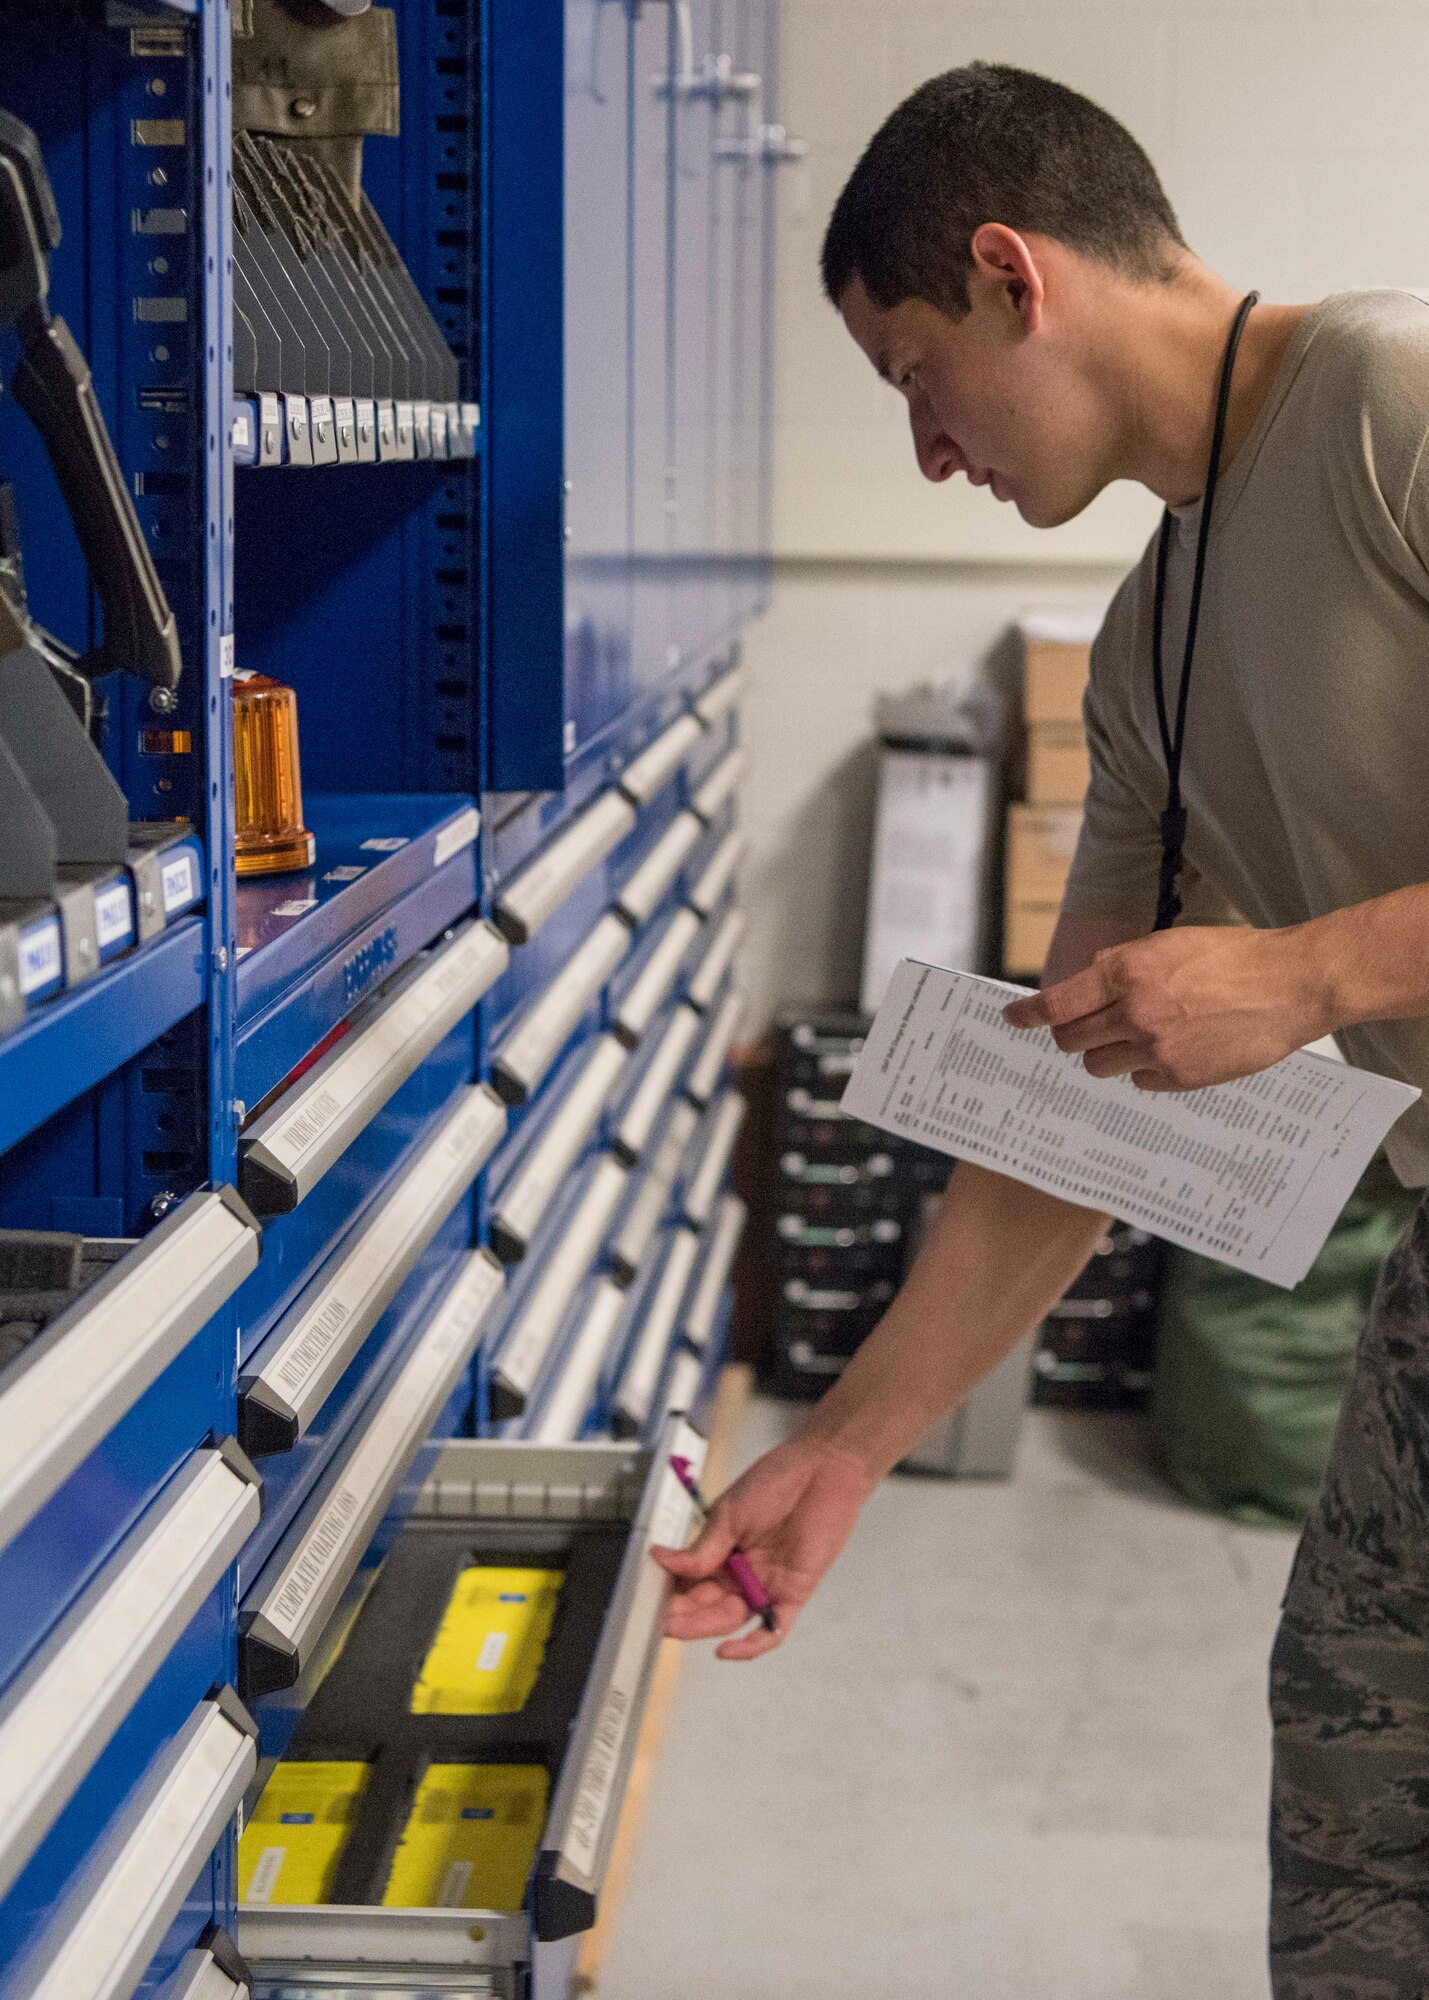 Airman 1st Class Daren Abad, a 525th Aircraft Maintenance Unit F-22 Raptor crew chief support technician, performs tool and equipment inventory at Joint Base Elmendorf-Richardson, Alaska, July 19, 2018. Abad is responsible for the issue and control of more than 10,000 tools during one of three shift inventories.